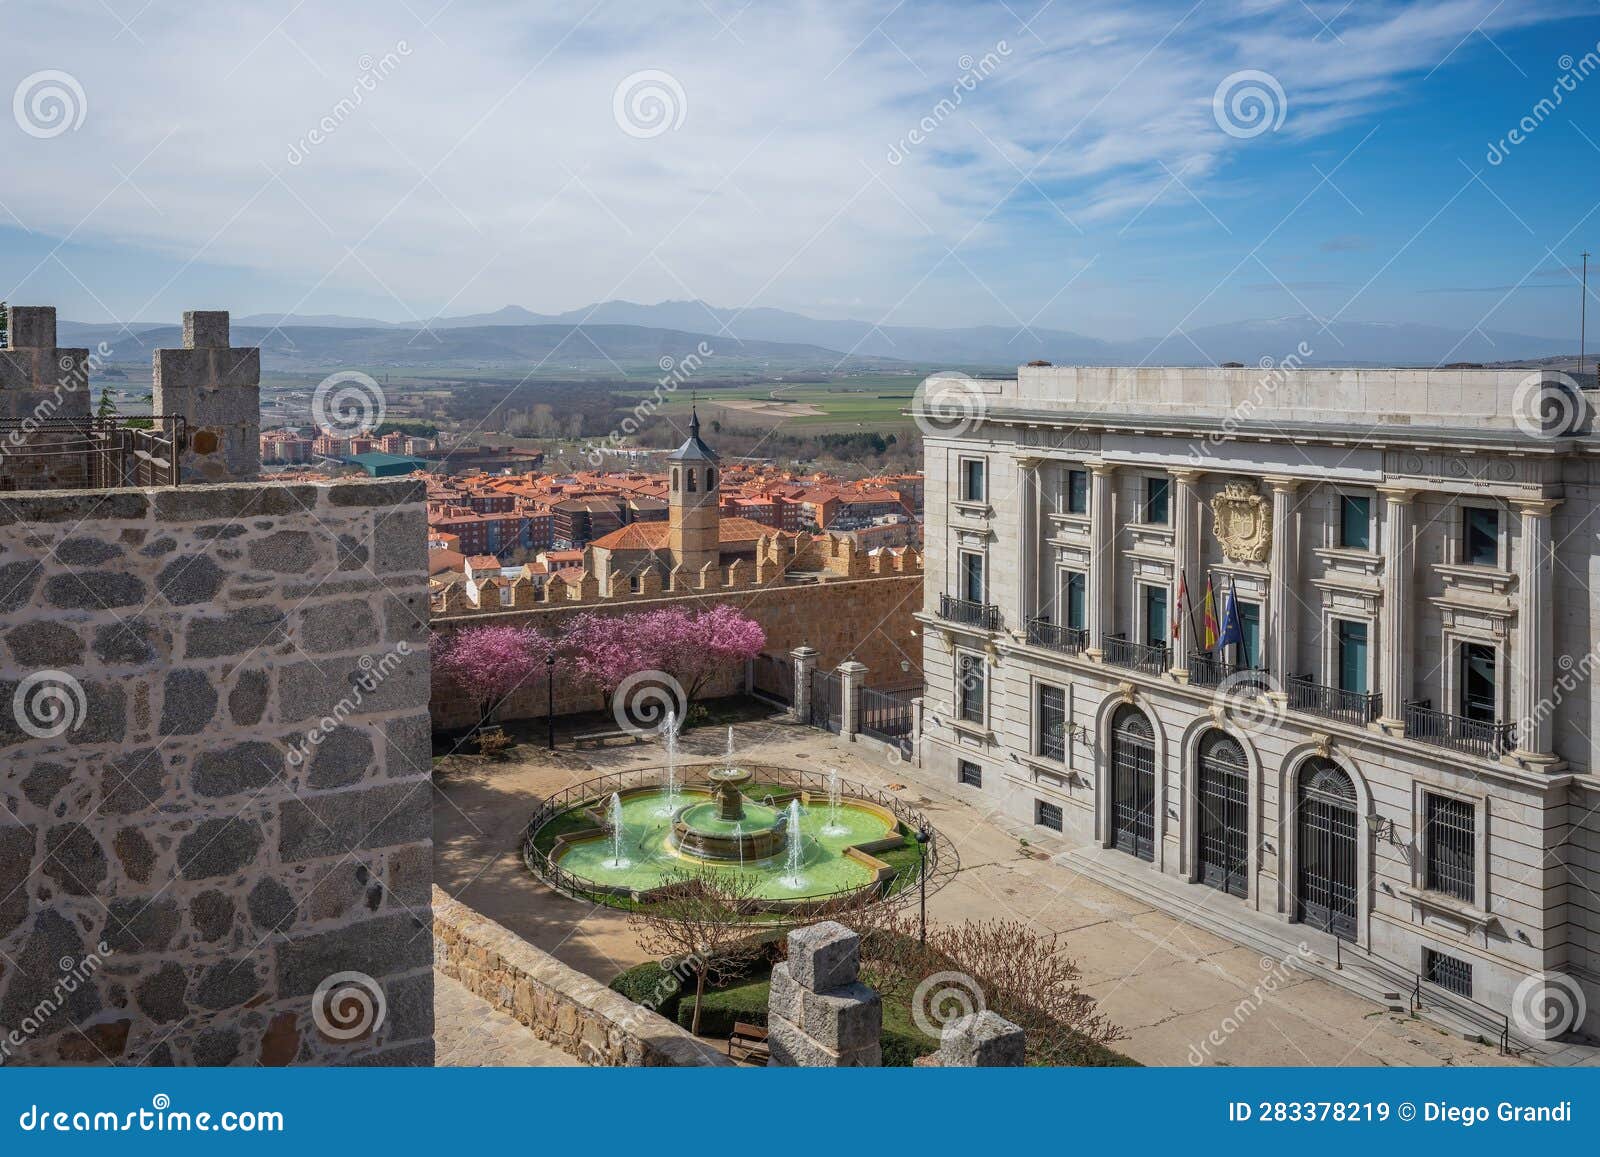 aerial view of plaza adolfo suarez square with economy and finance department building - avila, spain